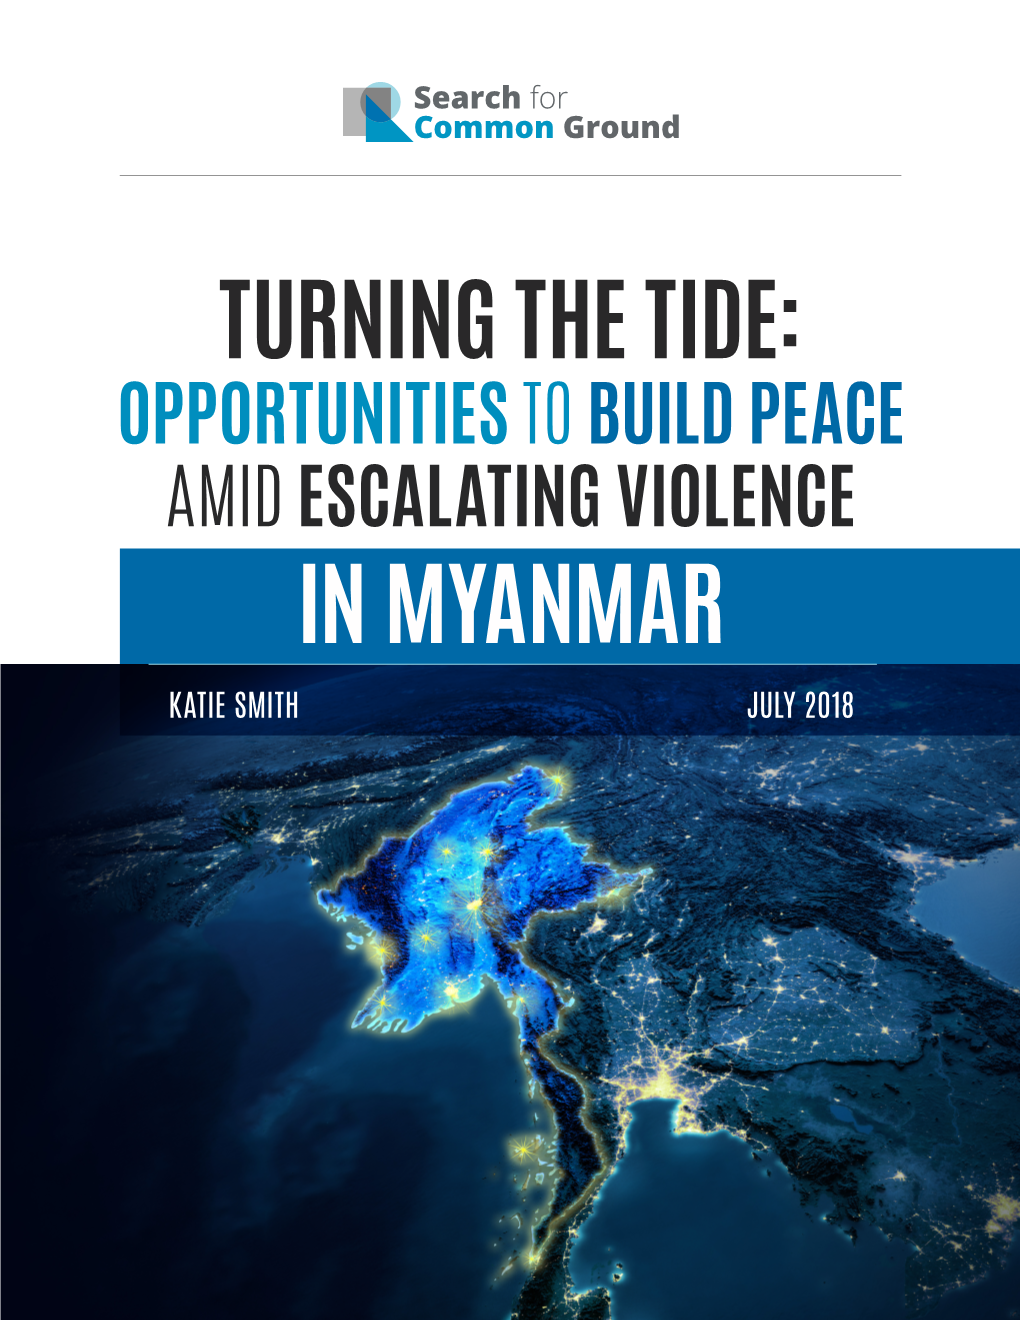 Opportunities to Build Peace Amid Escalating Violence in Myanmar